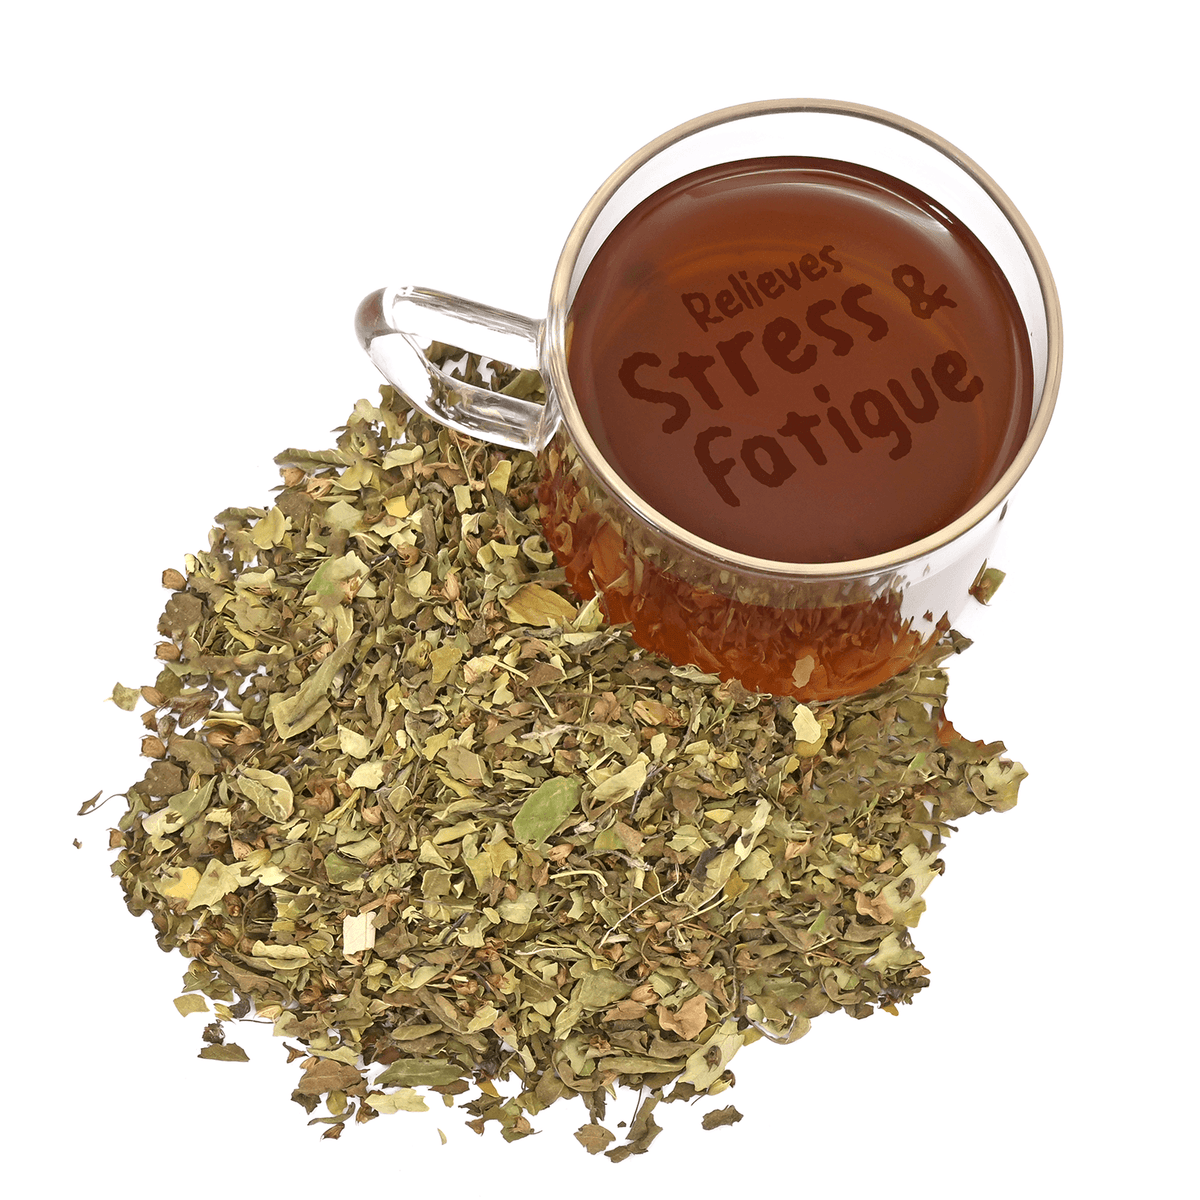 Tulsi Moringa Tea - Organic & Naturally Shade Dried Blend 50g - Sugar free & Caffeine free without Preservatives or Artificial Flavours